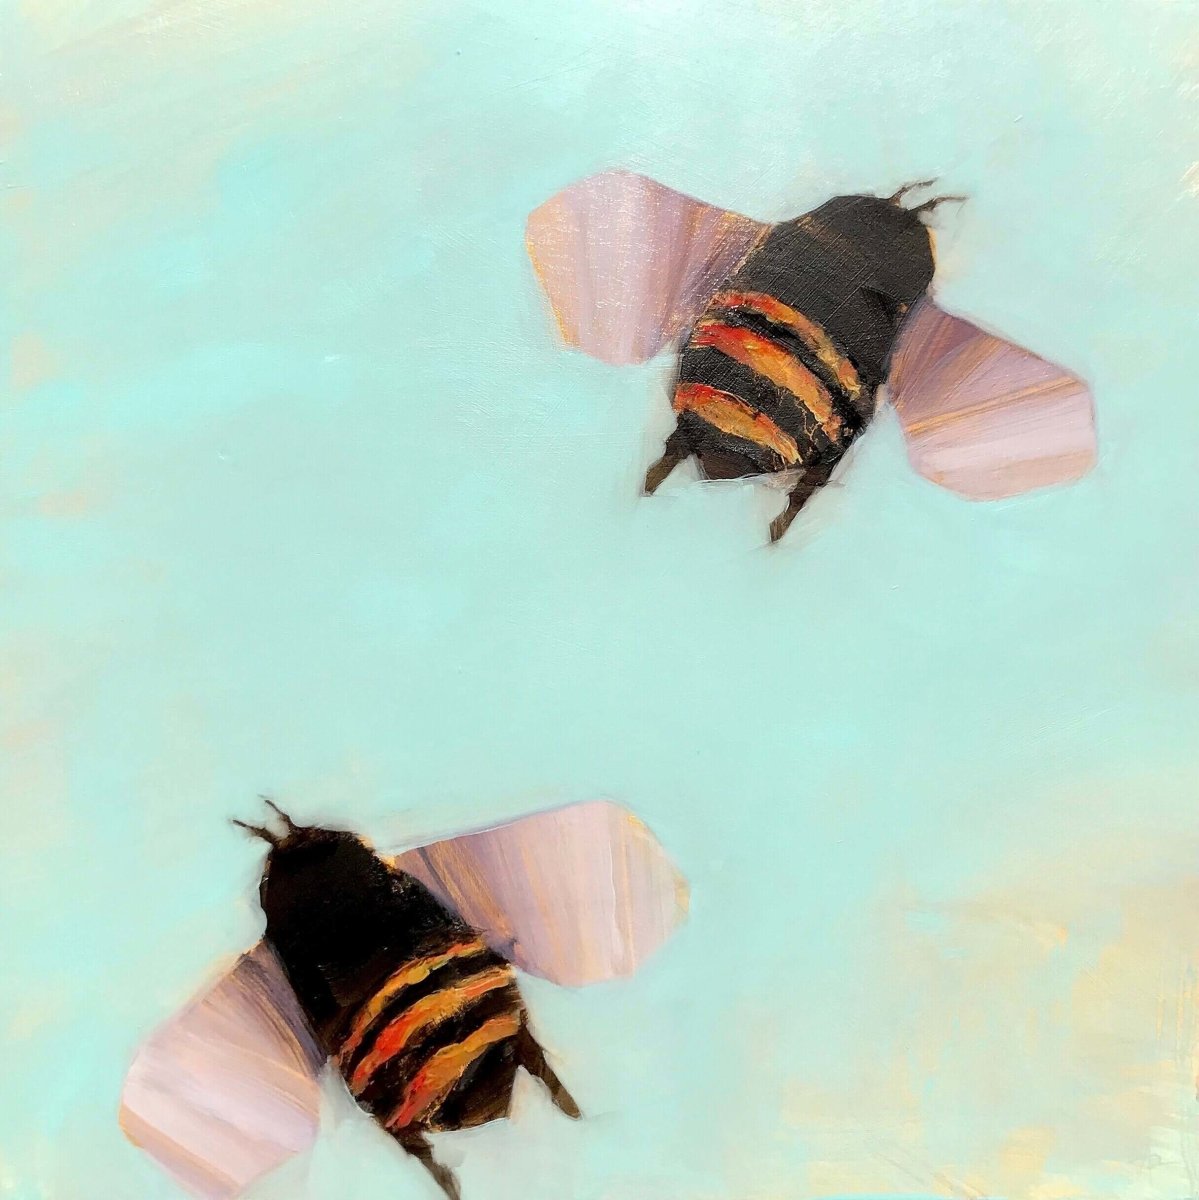 Bees 2-33 by Angie Renfro at LePrince Galleries